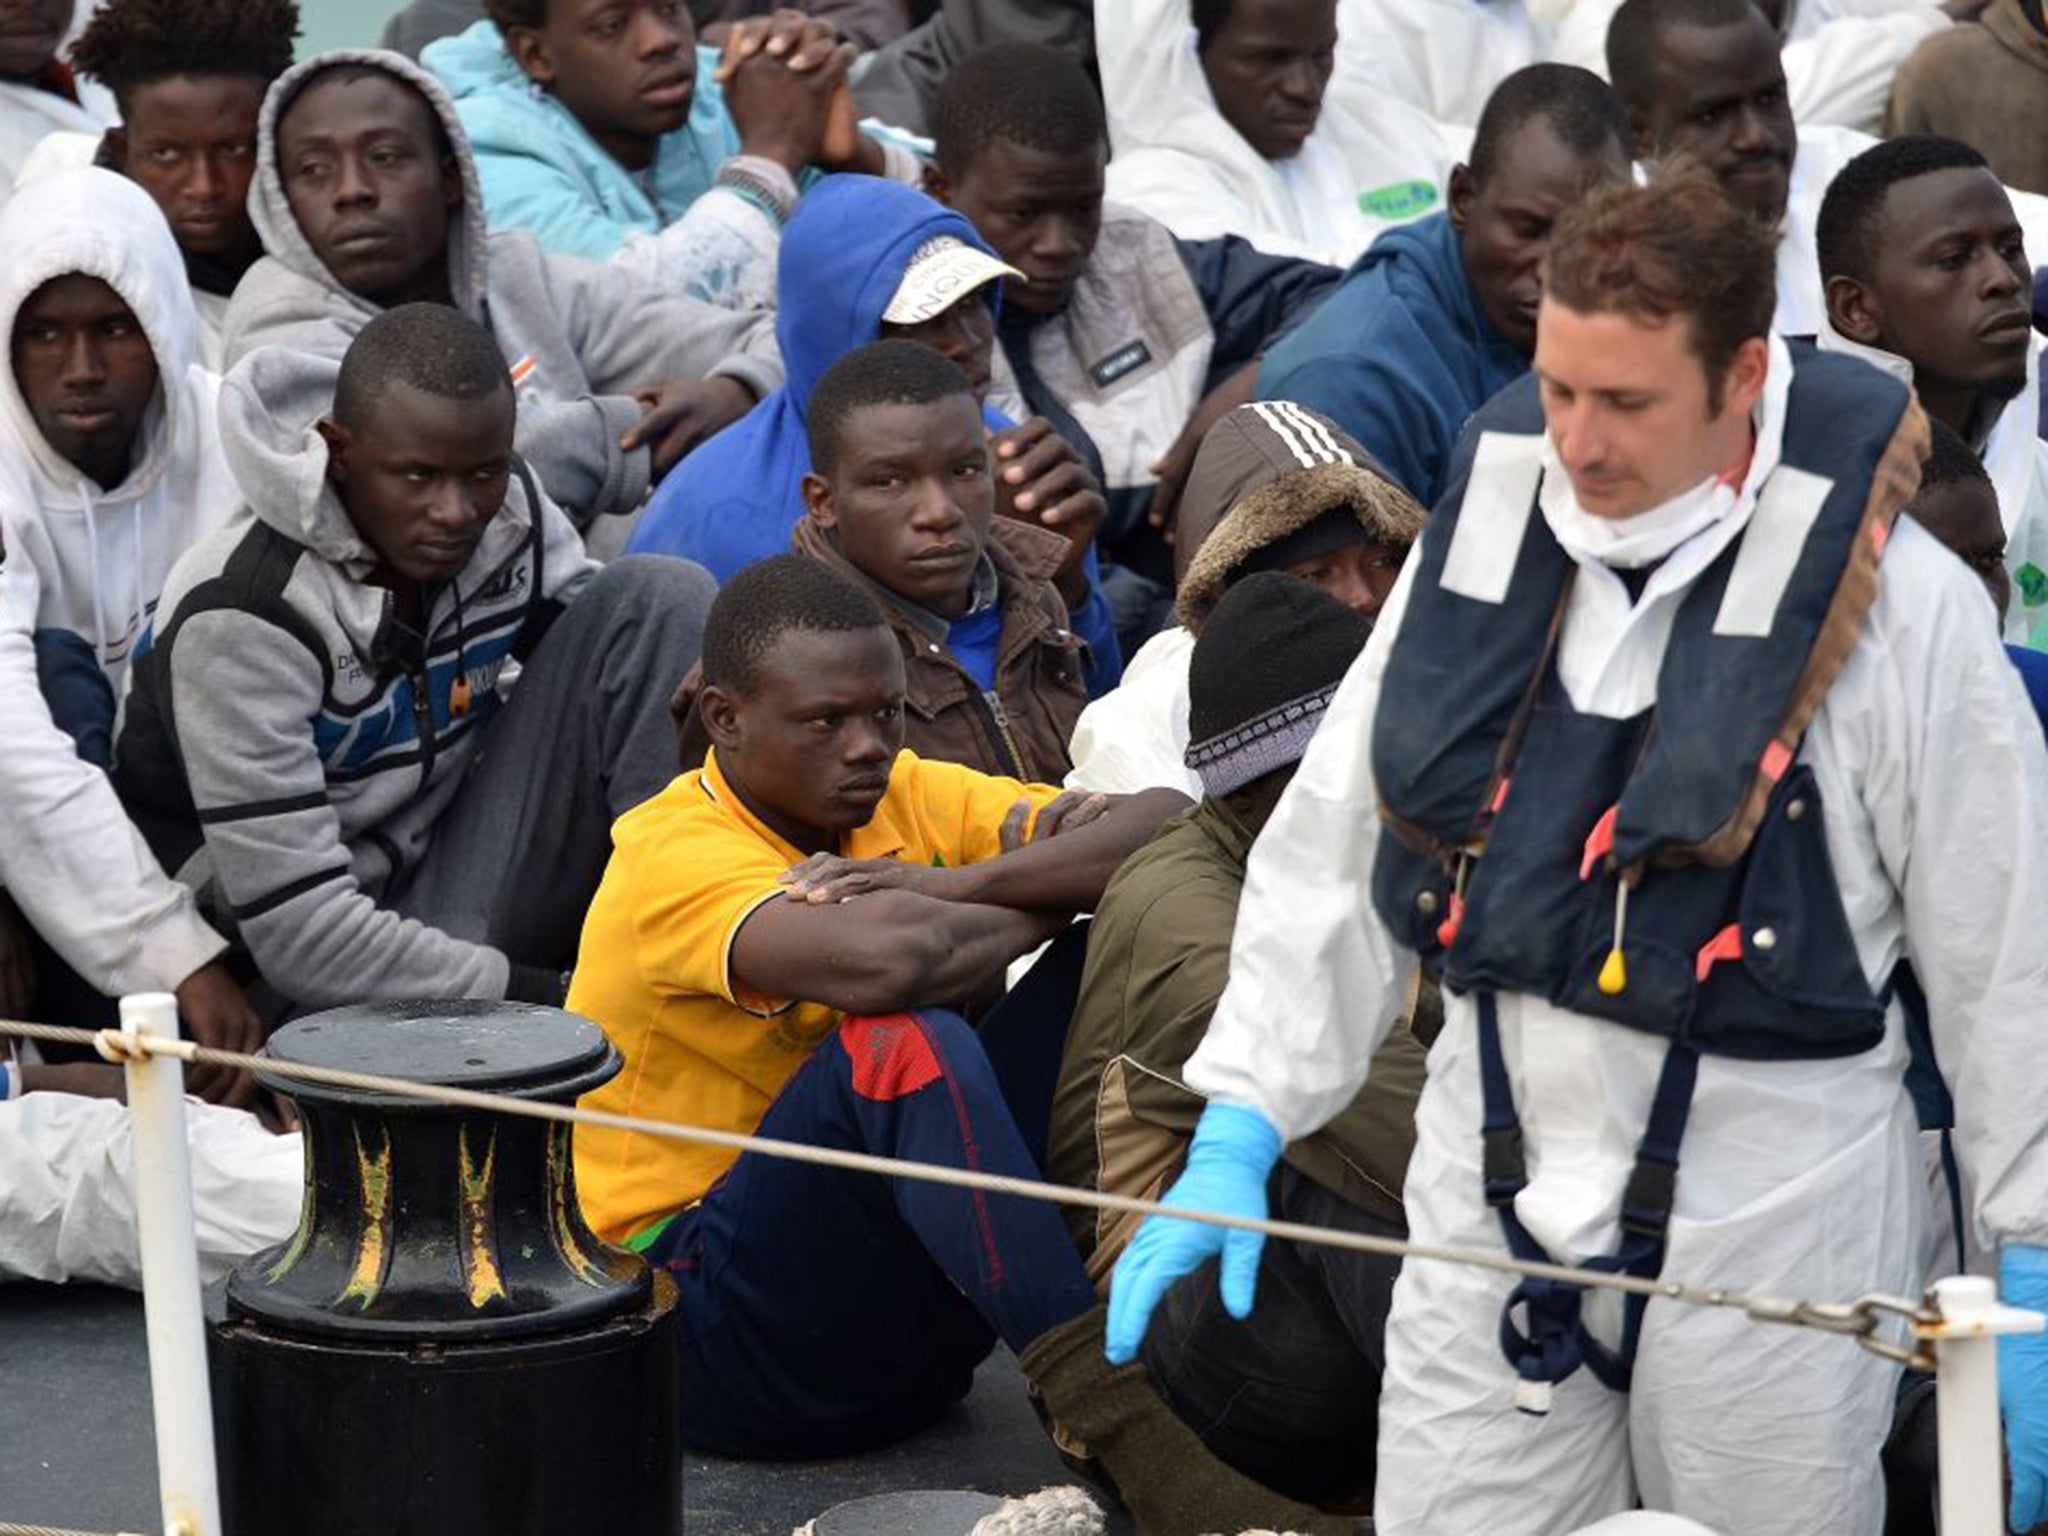 Italian press is reporting that coaches are being readied to transfer over 3,000 migrants inland (AFP/Getty)